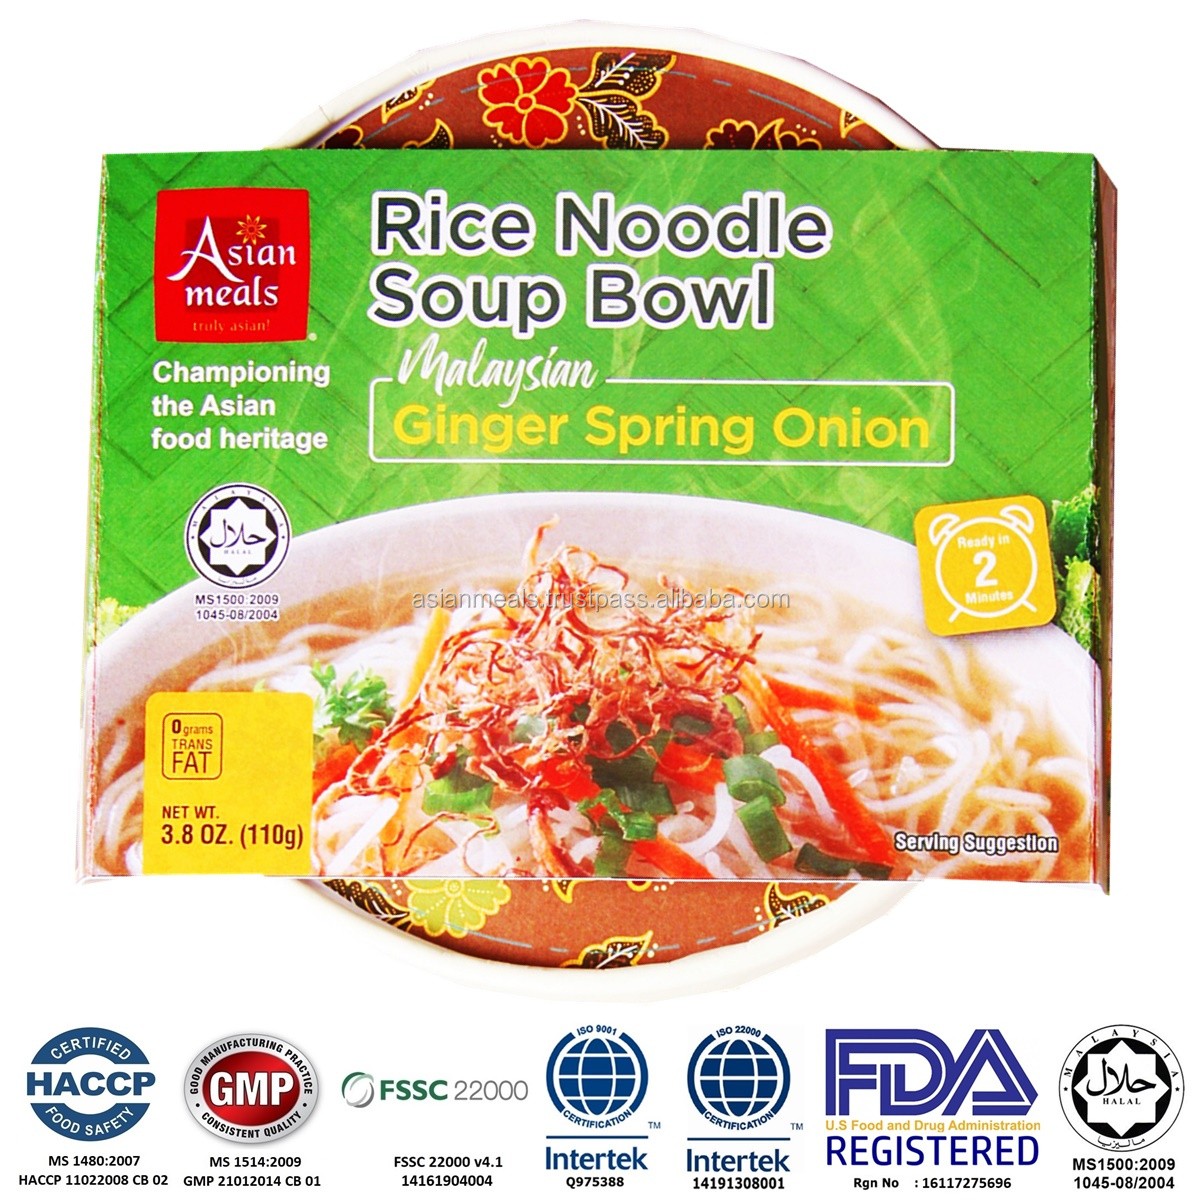 AsianMeals Rice Noodle Soup Bowl Halal Malaysian Ginger Spring Onion Scallions instant